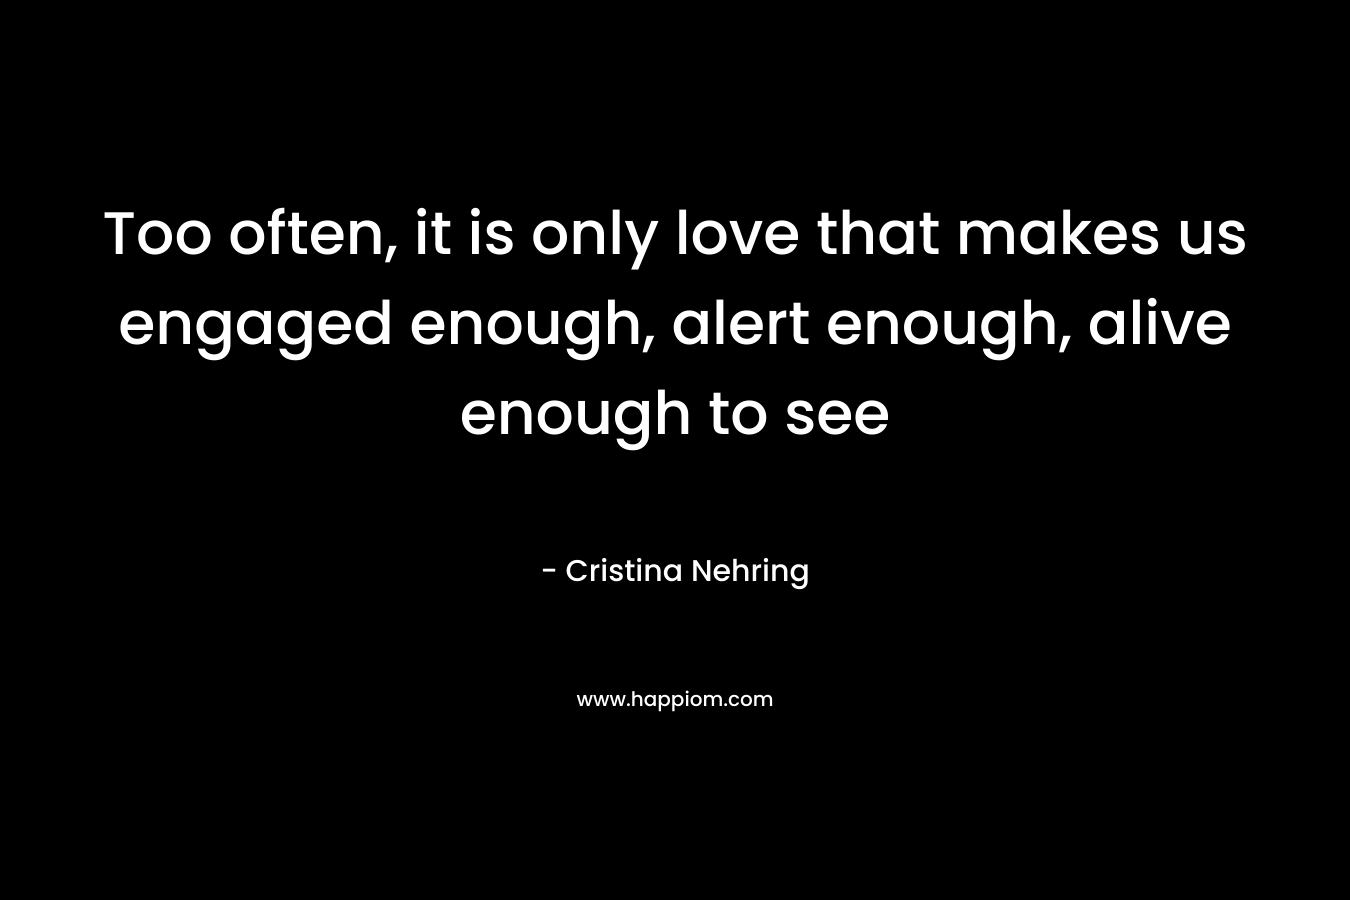 Too often, it is only love that makes us engaged enough, alert enough, alive enough to see